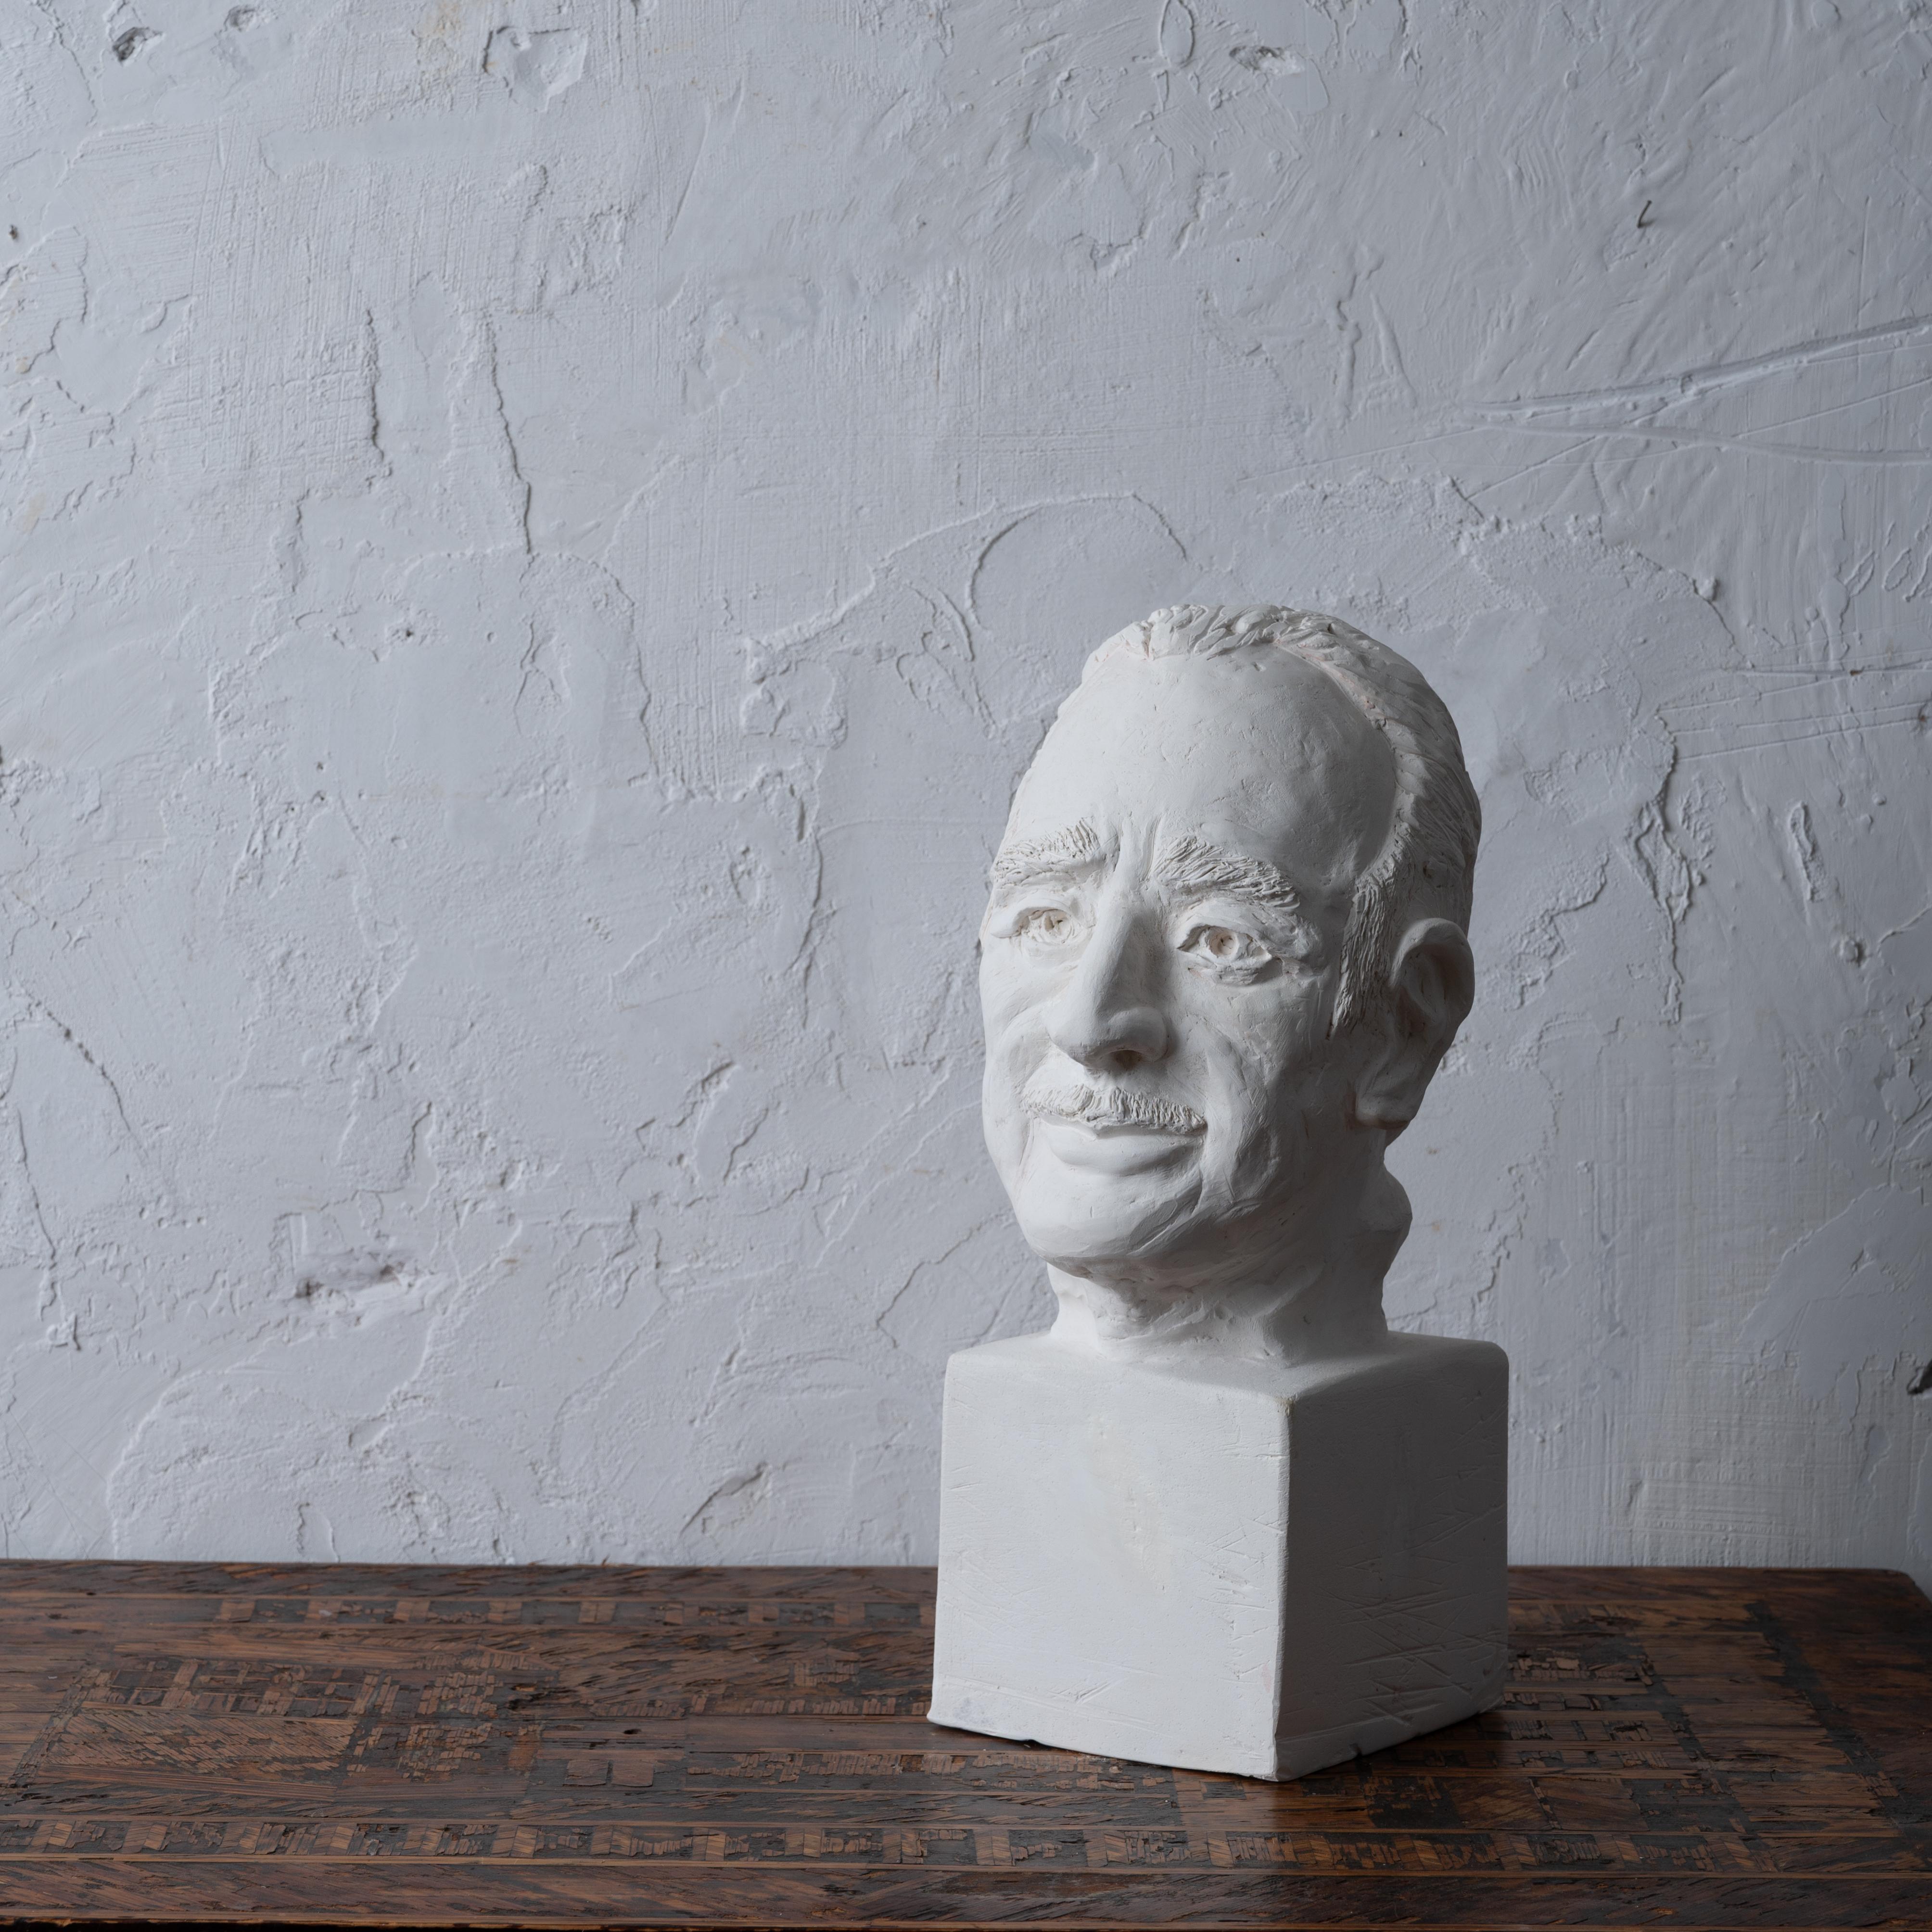 A plaster bust of sculptor Rosario Russell Fiore, circa 1980.

Unsigned.  Likely by his wife Florence Fiore.

8 inches wide by 9 ½ inches deep by 16 ½ inches tall

 

Rosario R. Fiore was a prominent American sculptor and member of the National